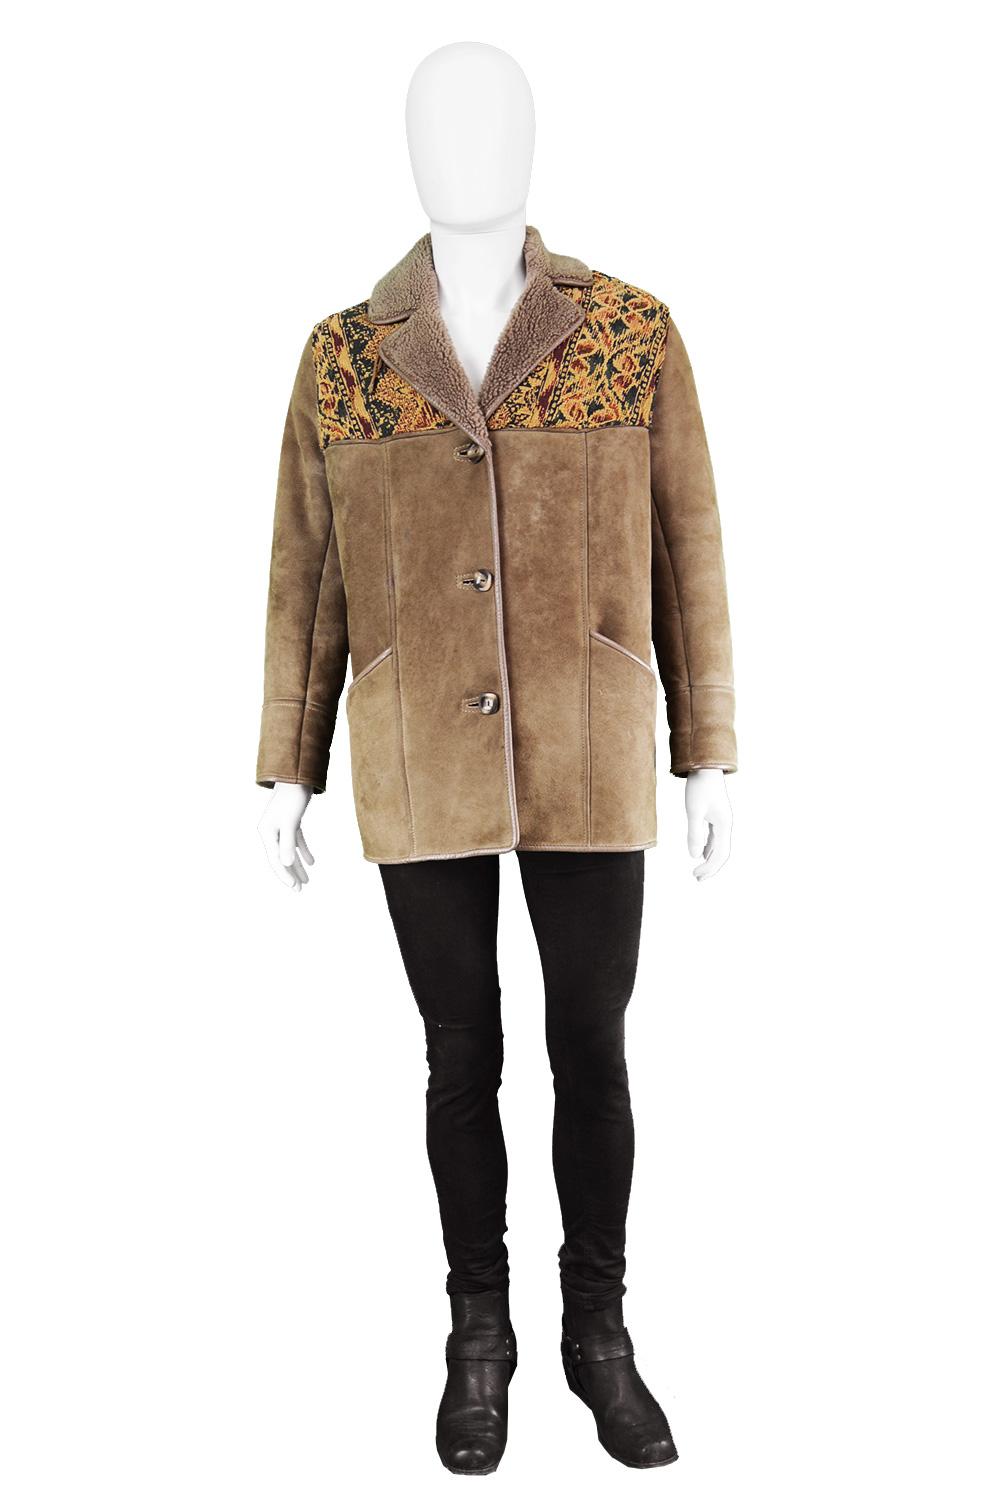 Vintage Tapestry Panelled Brown Sheepskin Shearling Lined Coat , 1970s

Size: Marked to fit 38” / 97cm chest/ bust which is roughly a men's Small / Women's Medium and gives a slightly loose fit. 
Chest - 46” / 117cm 
Waist - 46” / 117cm
Length